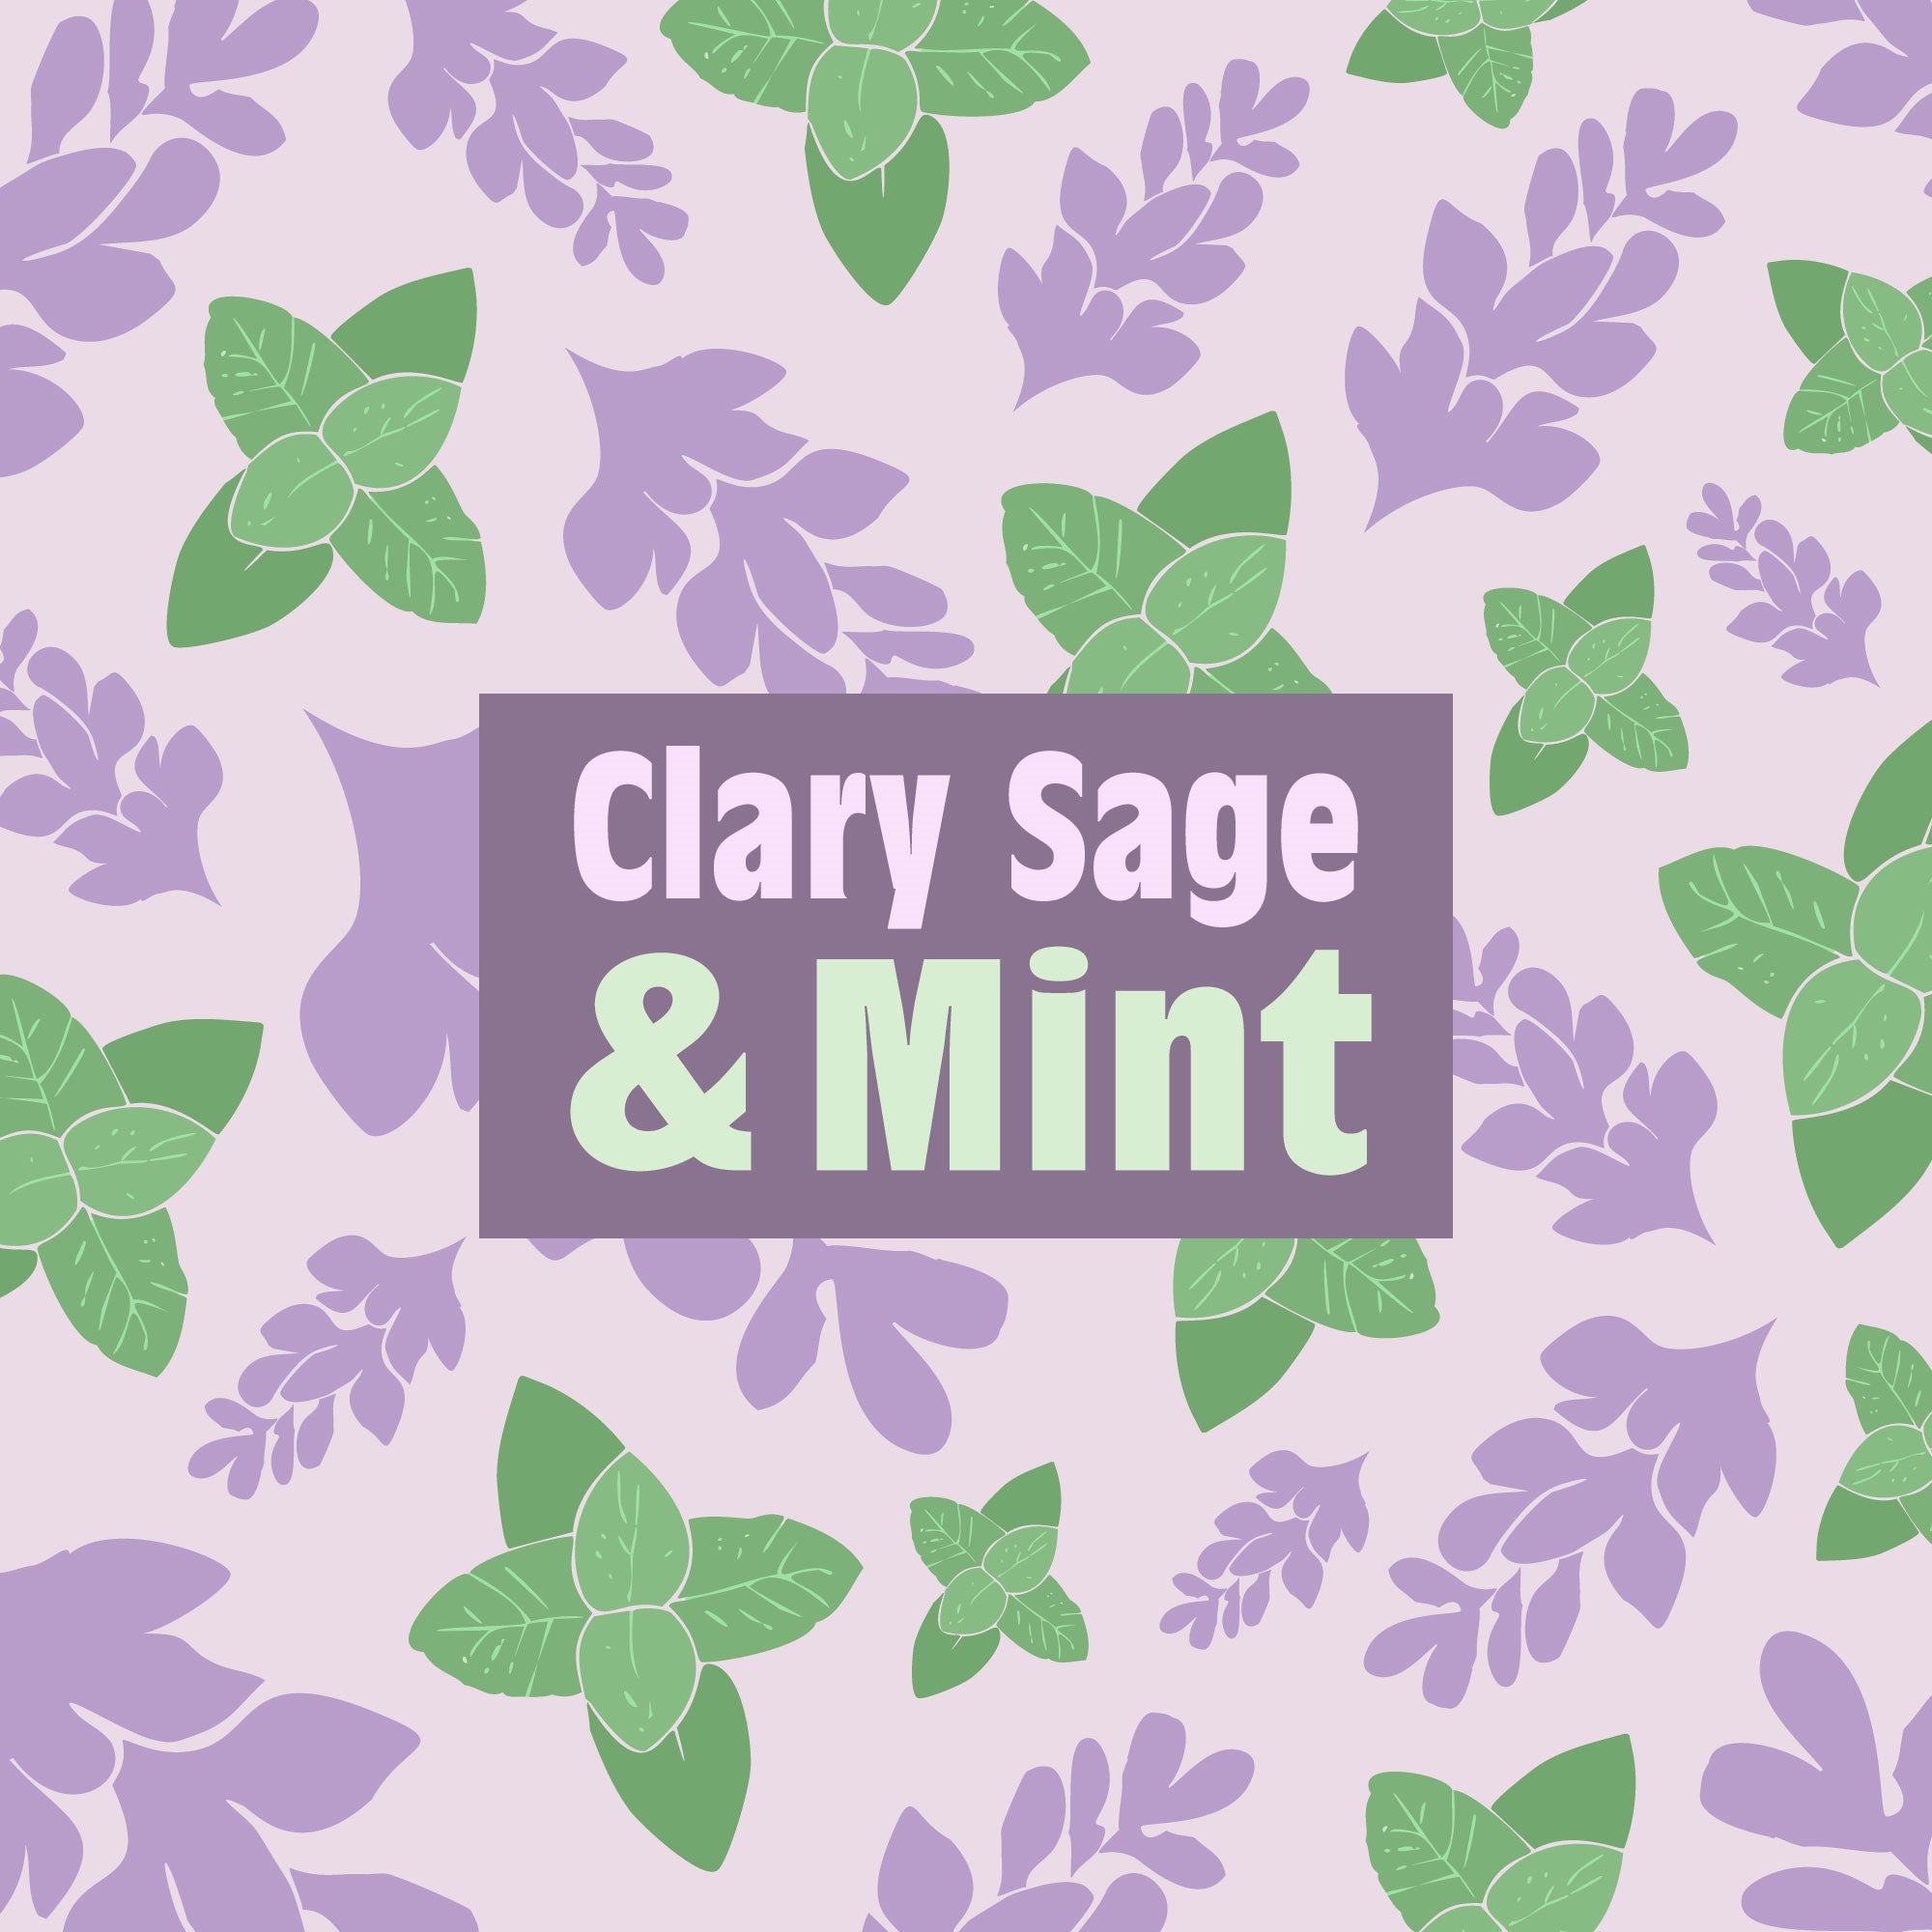 New fragrance launch - Clary Sage and Mint!